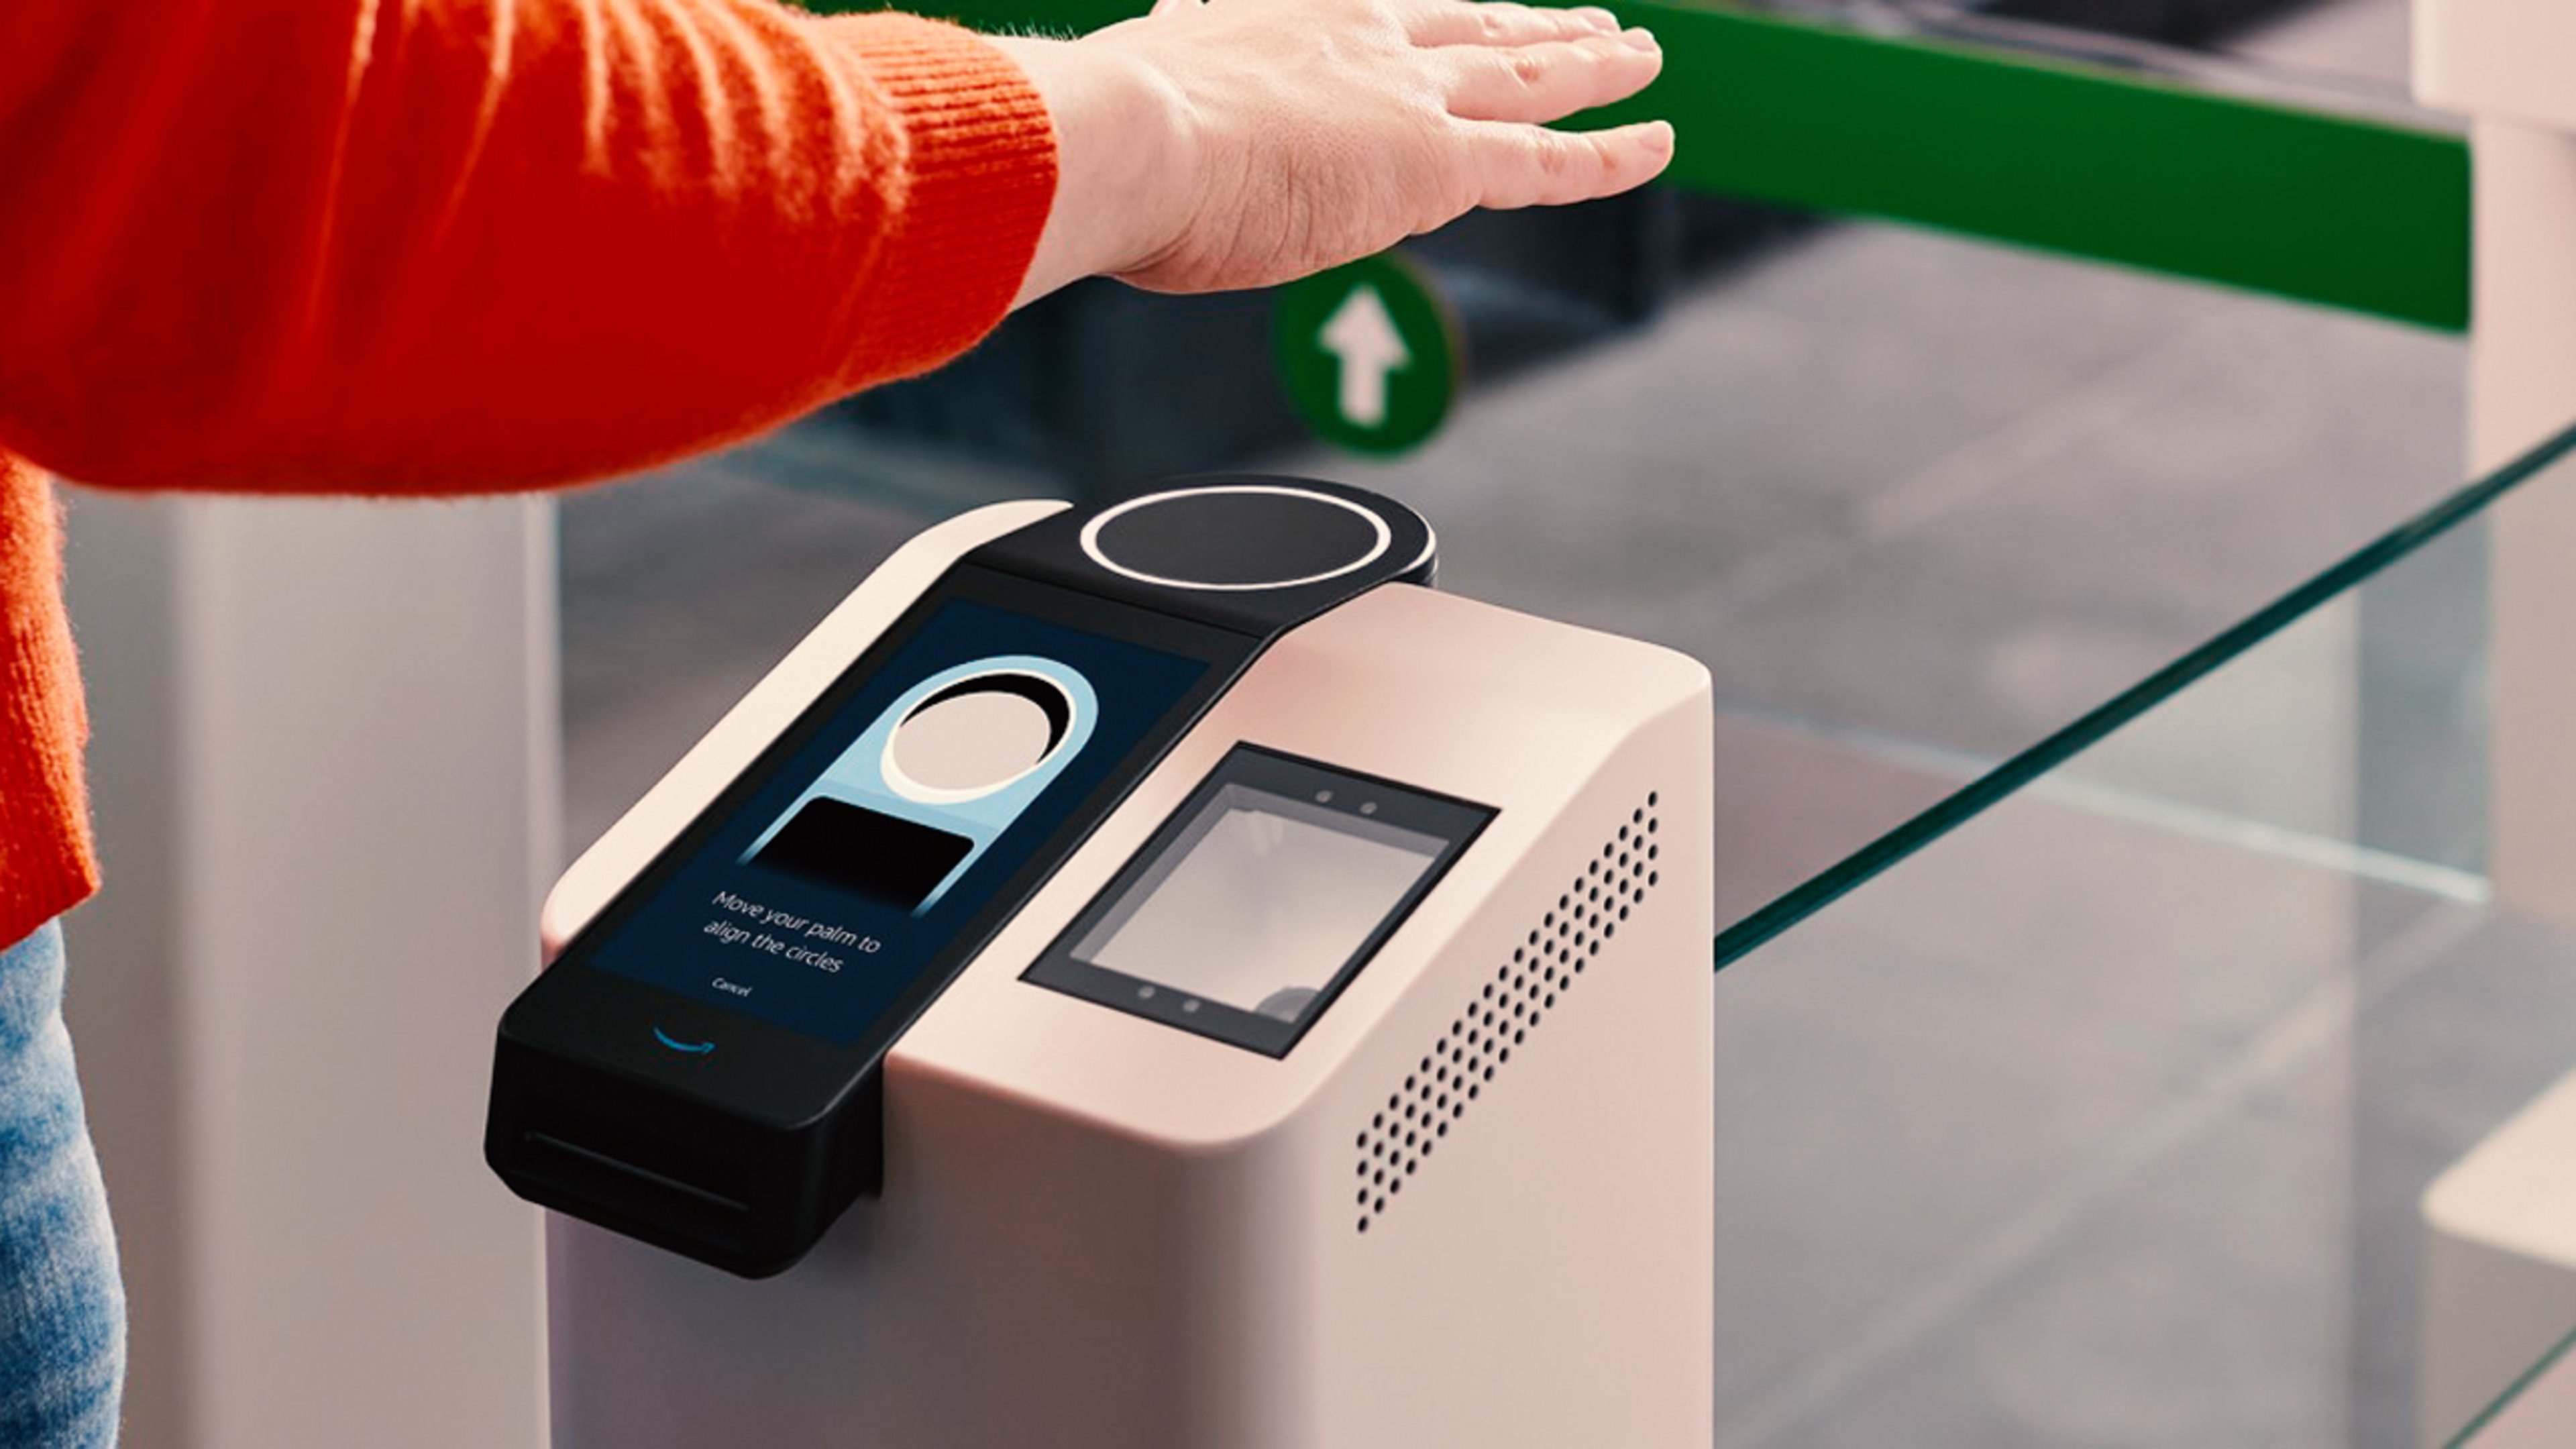 Amazon’s new palm-recognition biometric device lets you pay without touching